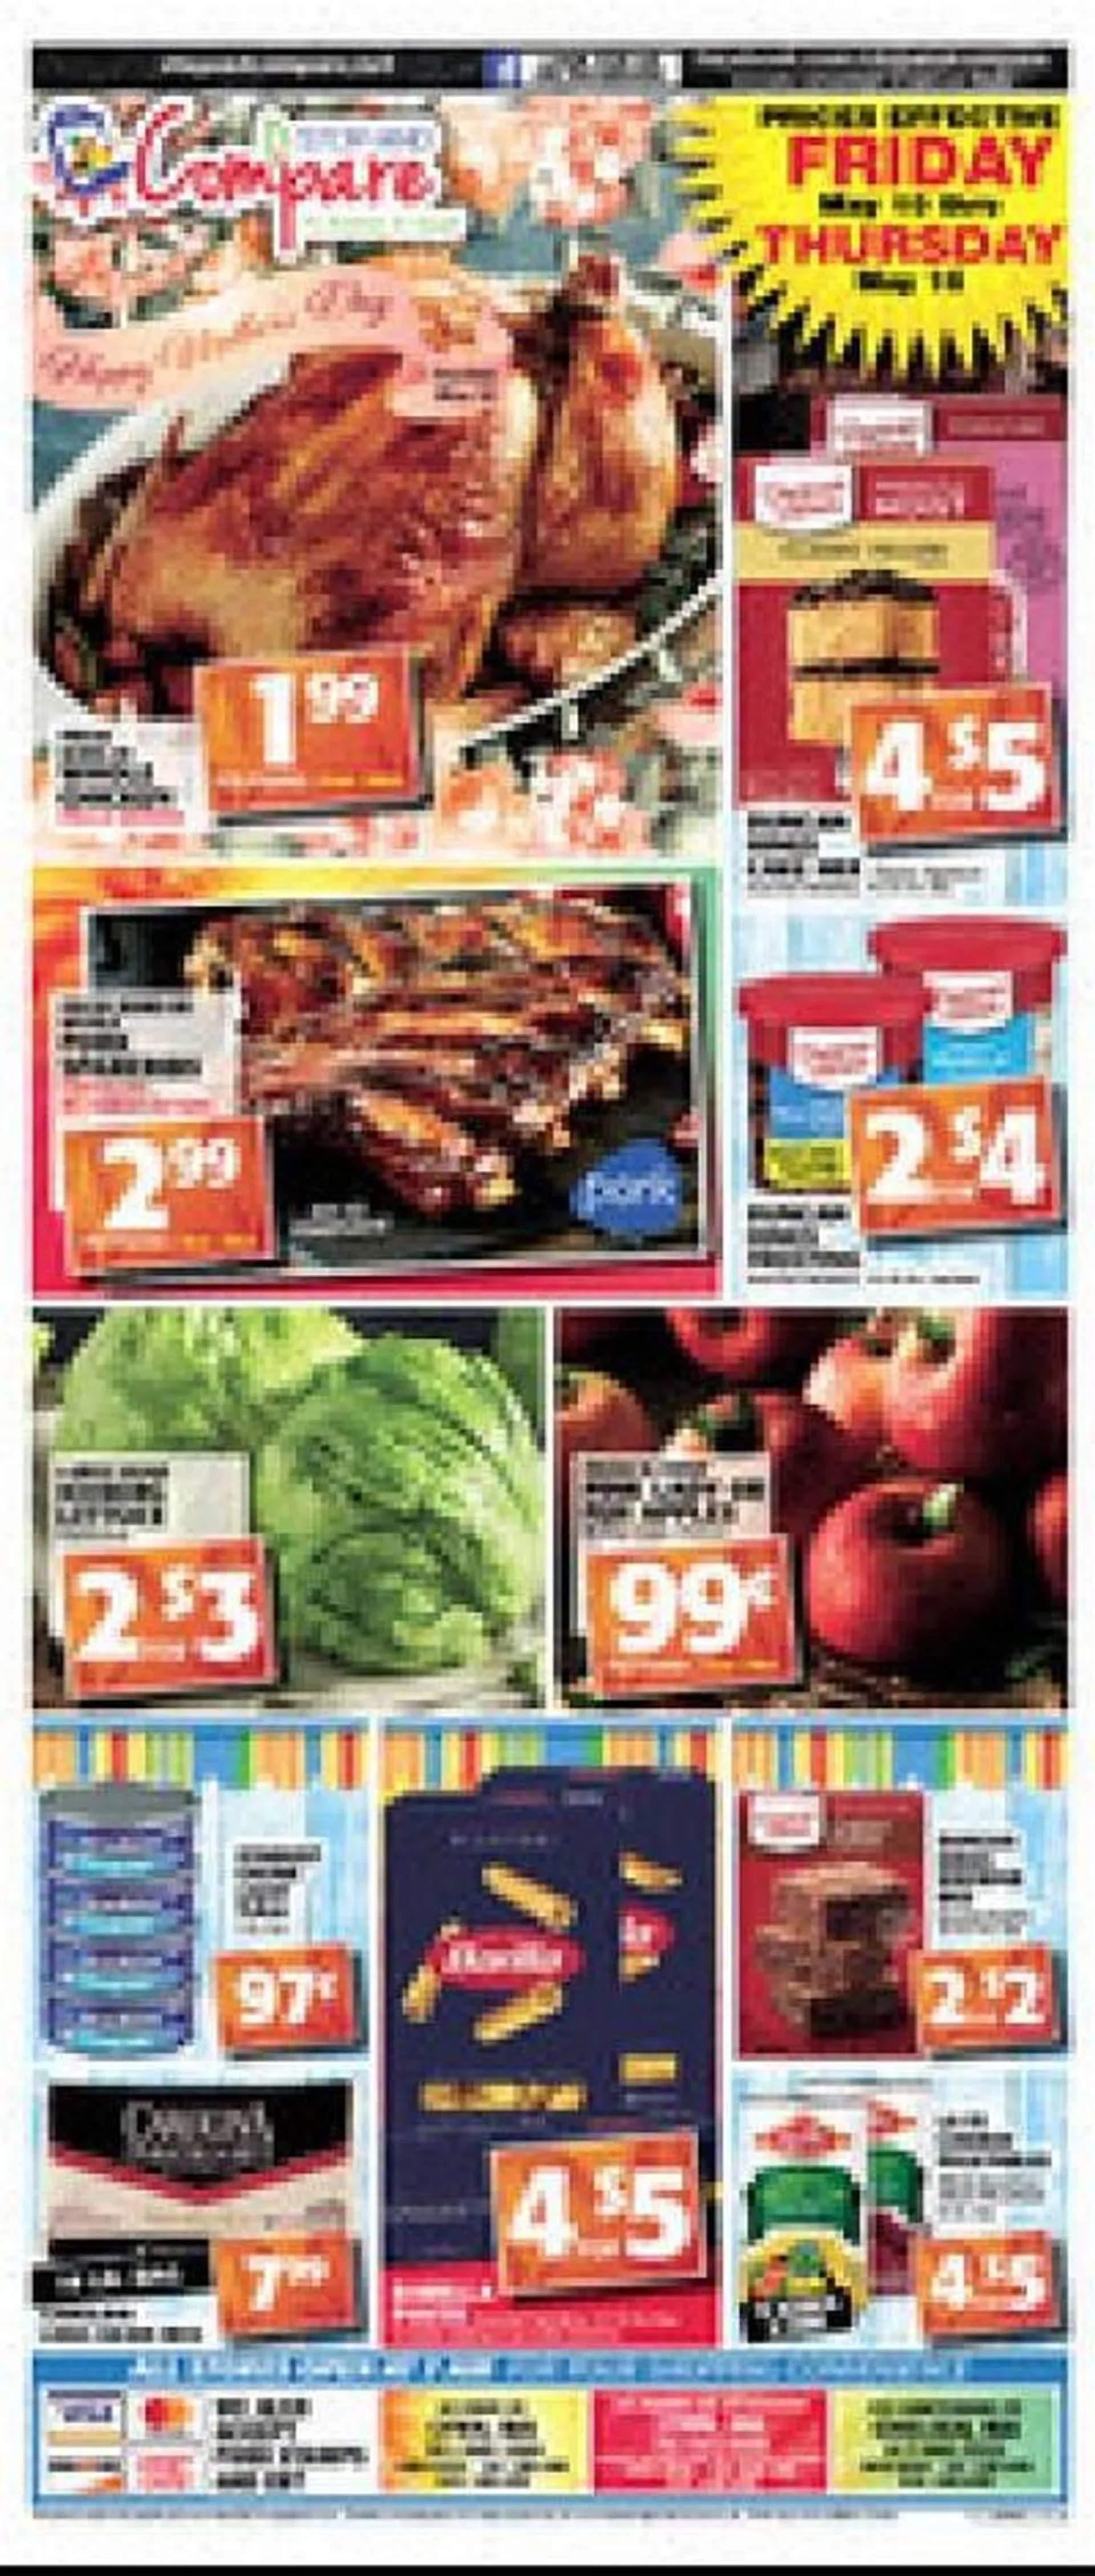 Stop and Compare Markets Weekly Ad - 1